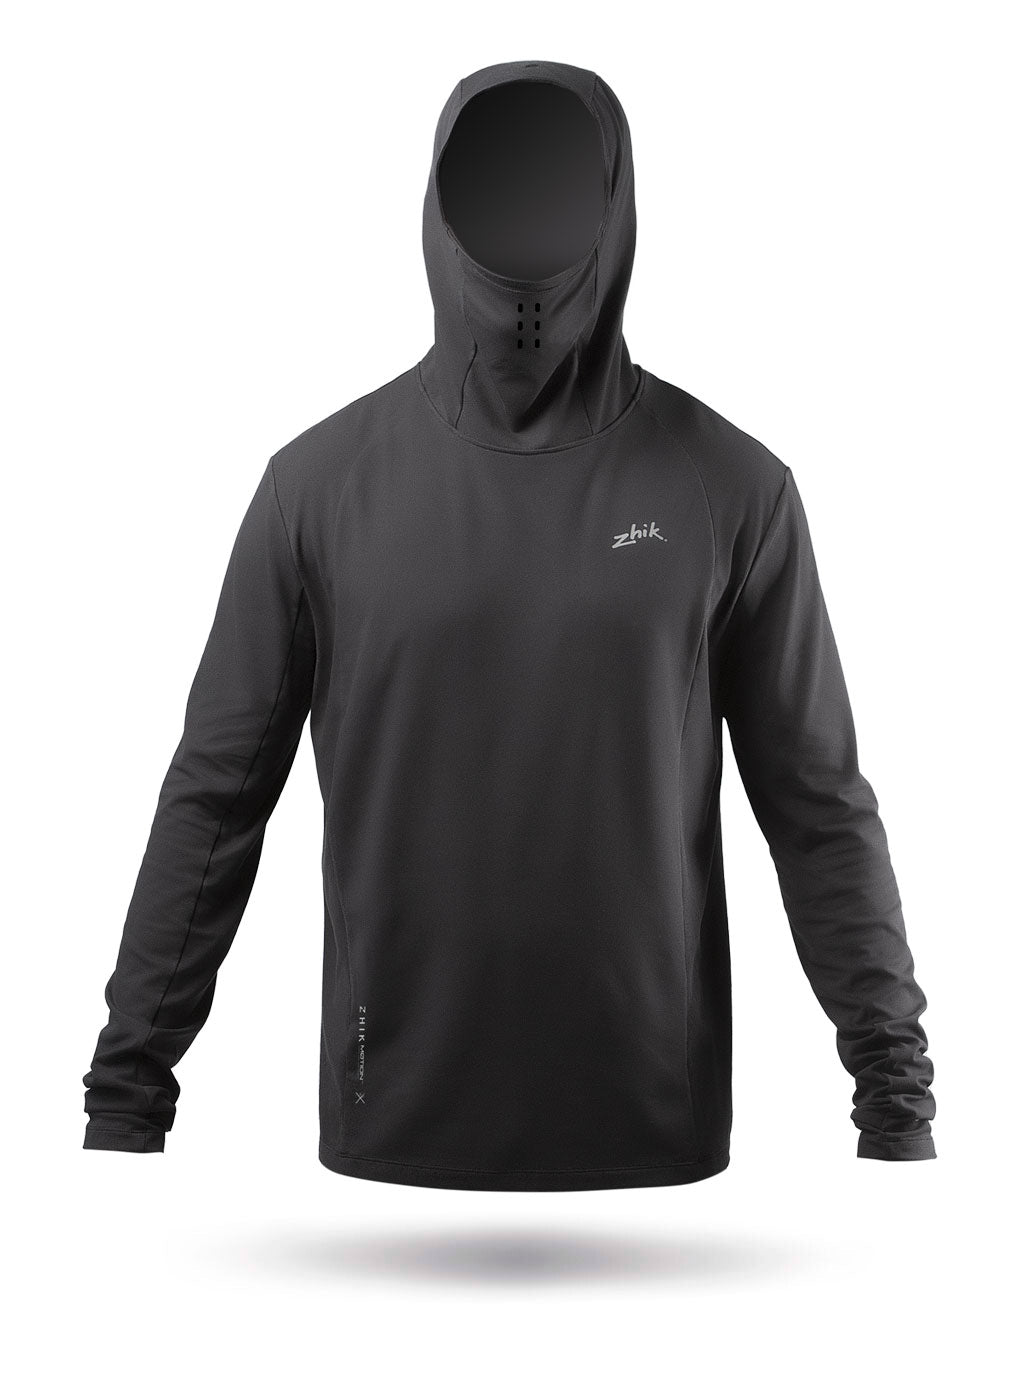 Mens Black ZhikMotion Hooded Top